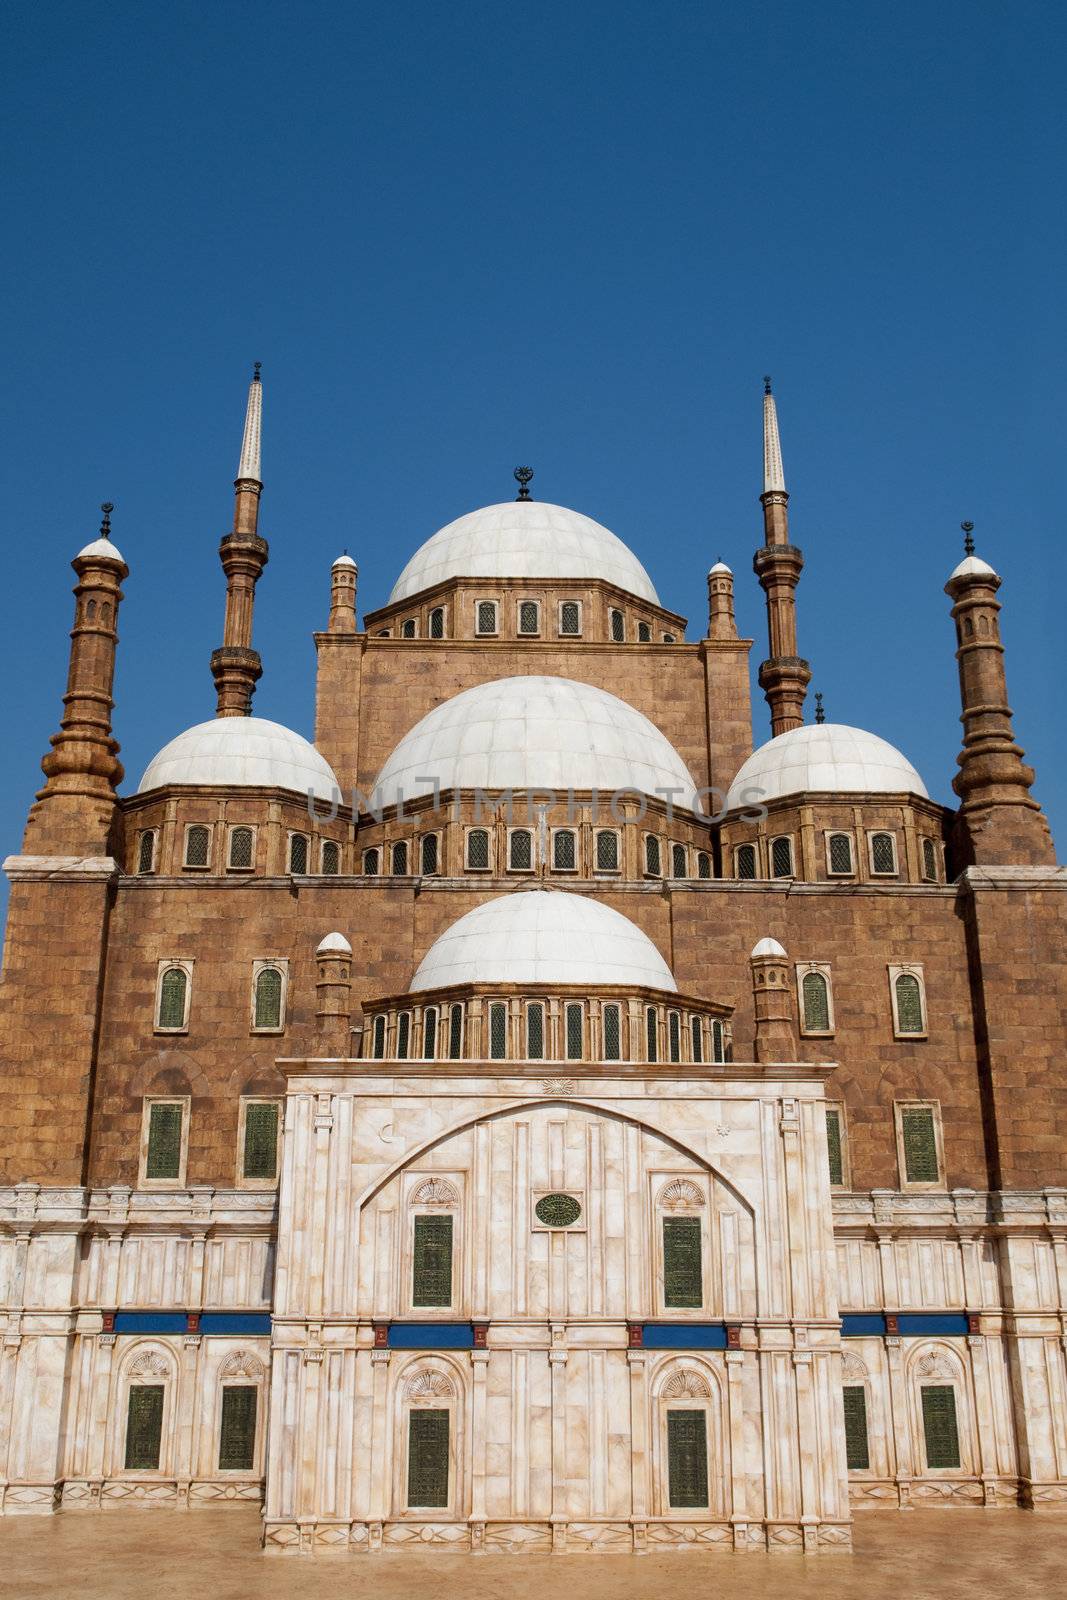 Exterior view of Mohammed Ali Mosque, Cairo, Egypt.